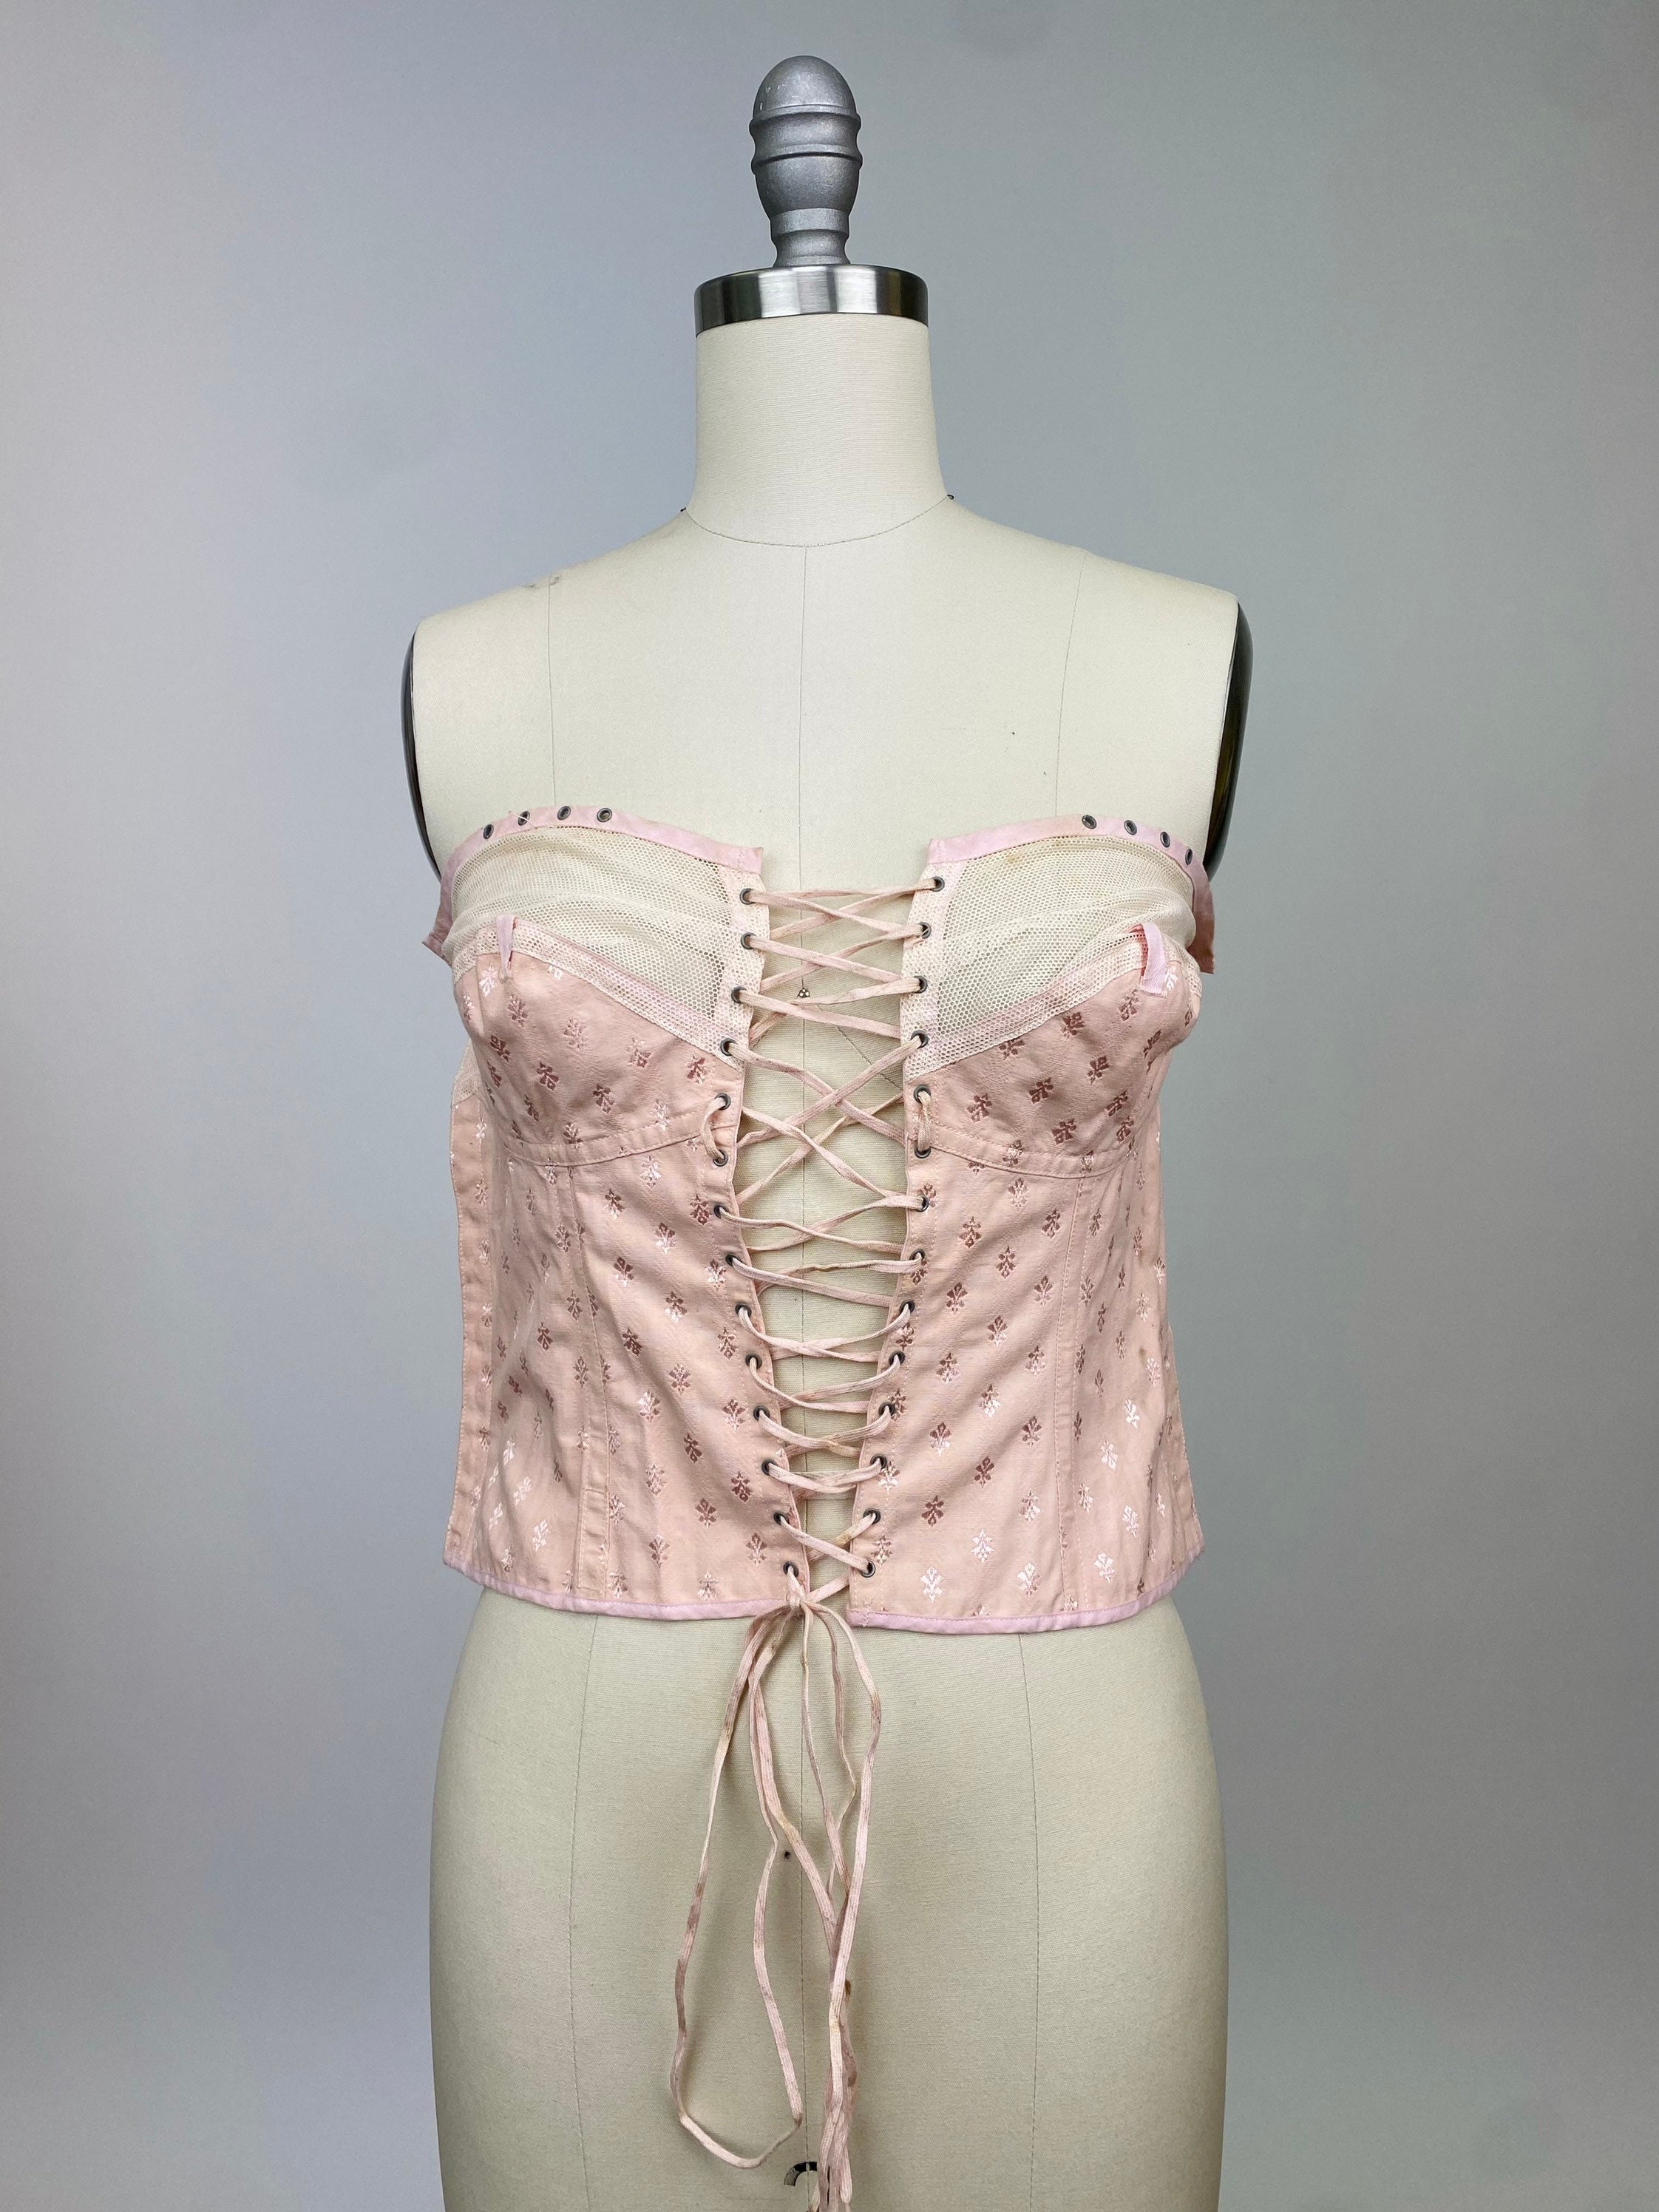 Rare Vintage Early 1900s Spirella Corset, Bustier, Lace up Undergarment,  Body Shaper, Pale Blush Pink, Front Only -  Canada